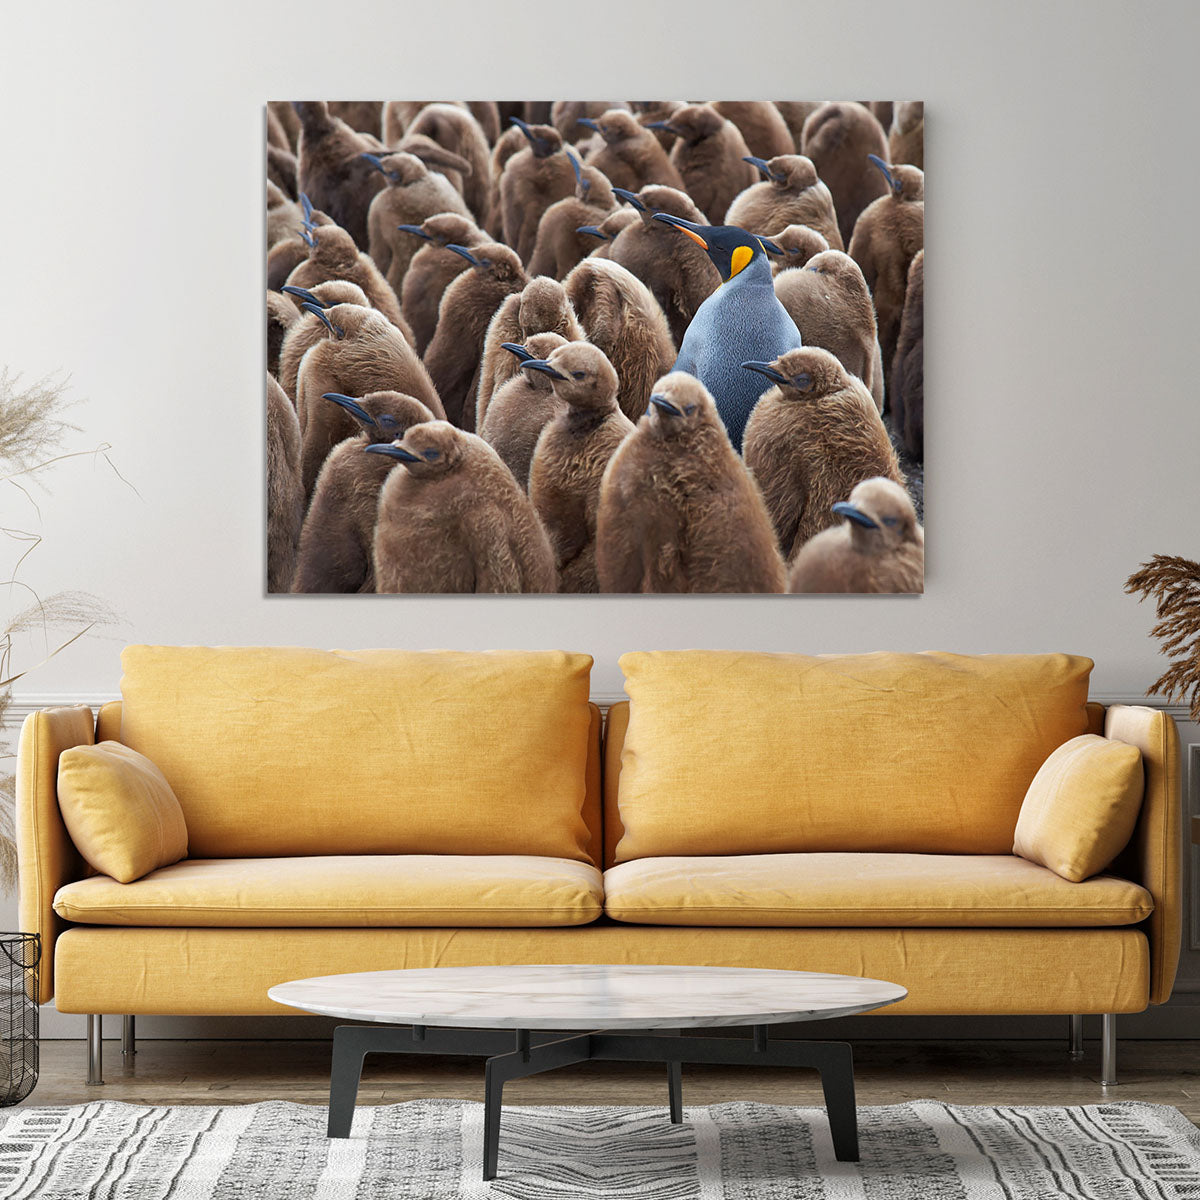 Adult King Penguin Aptenodytes patagonicus standing amongst a large group Canvas Print or Poster - Canvas Art Rocks - 4